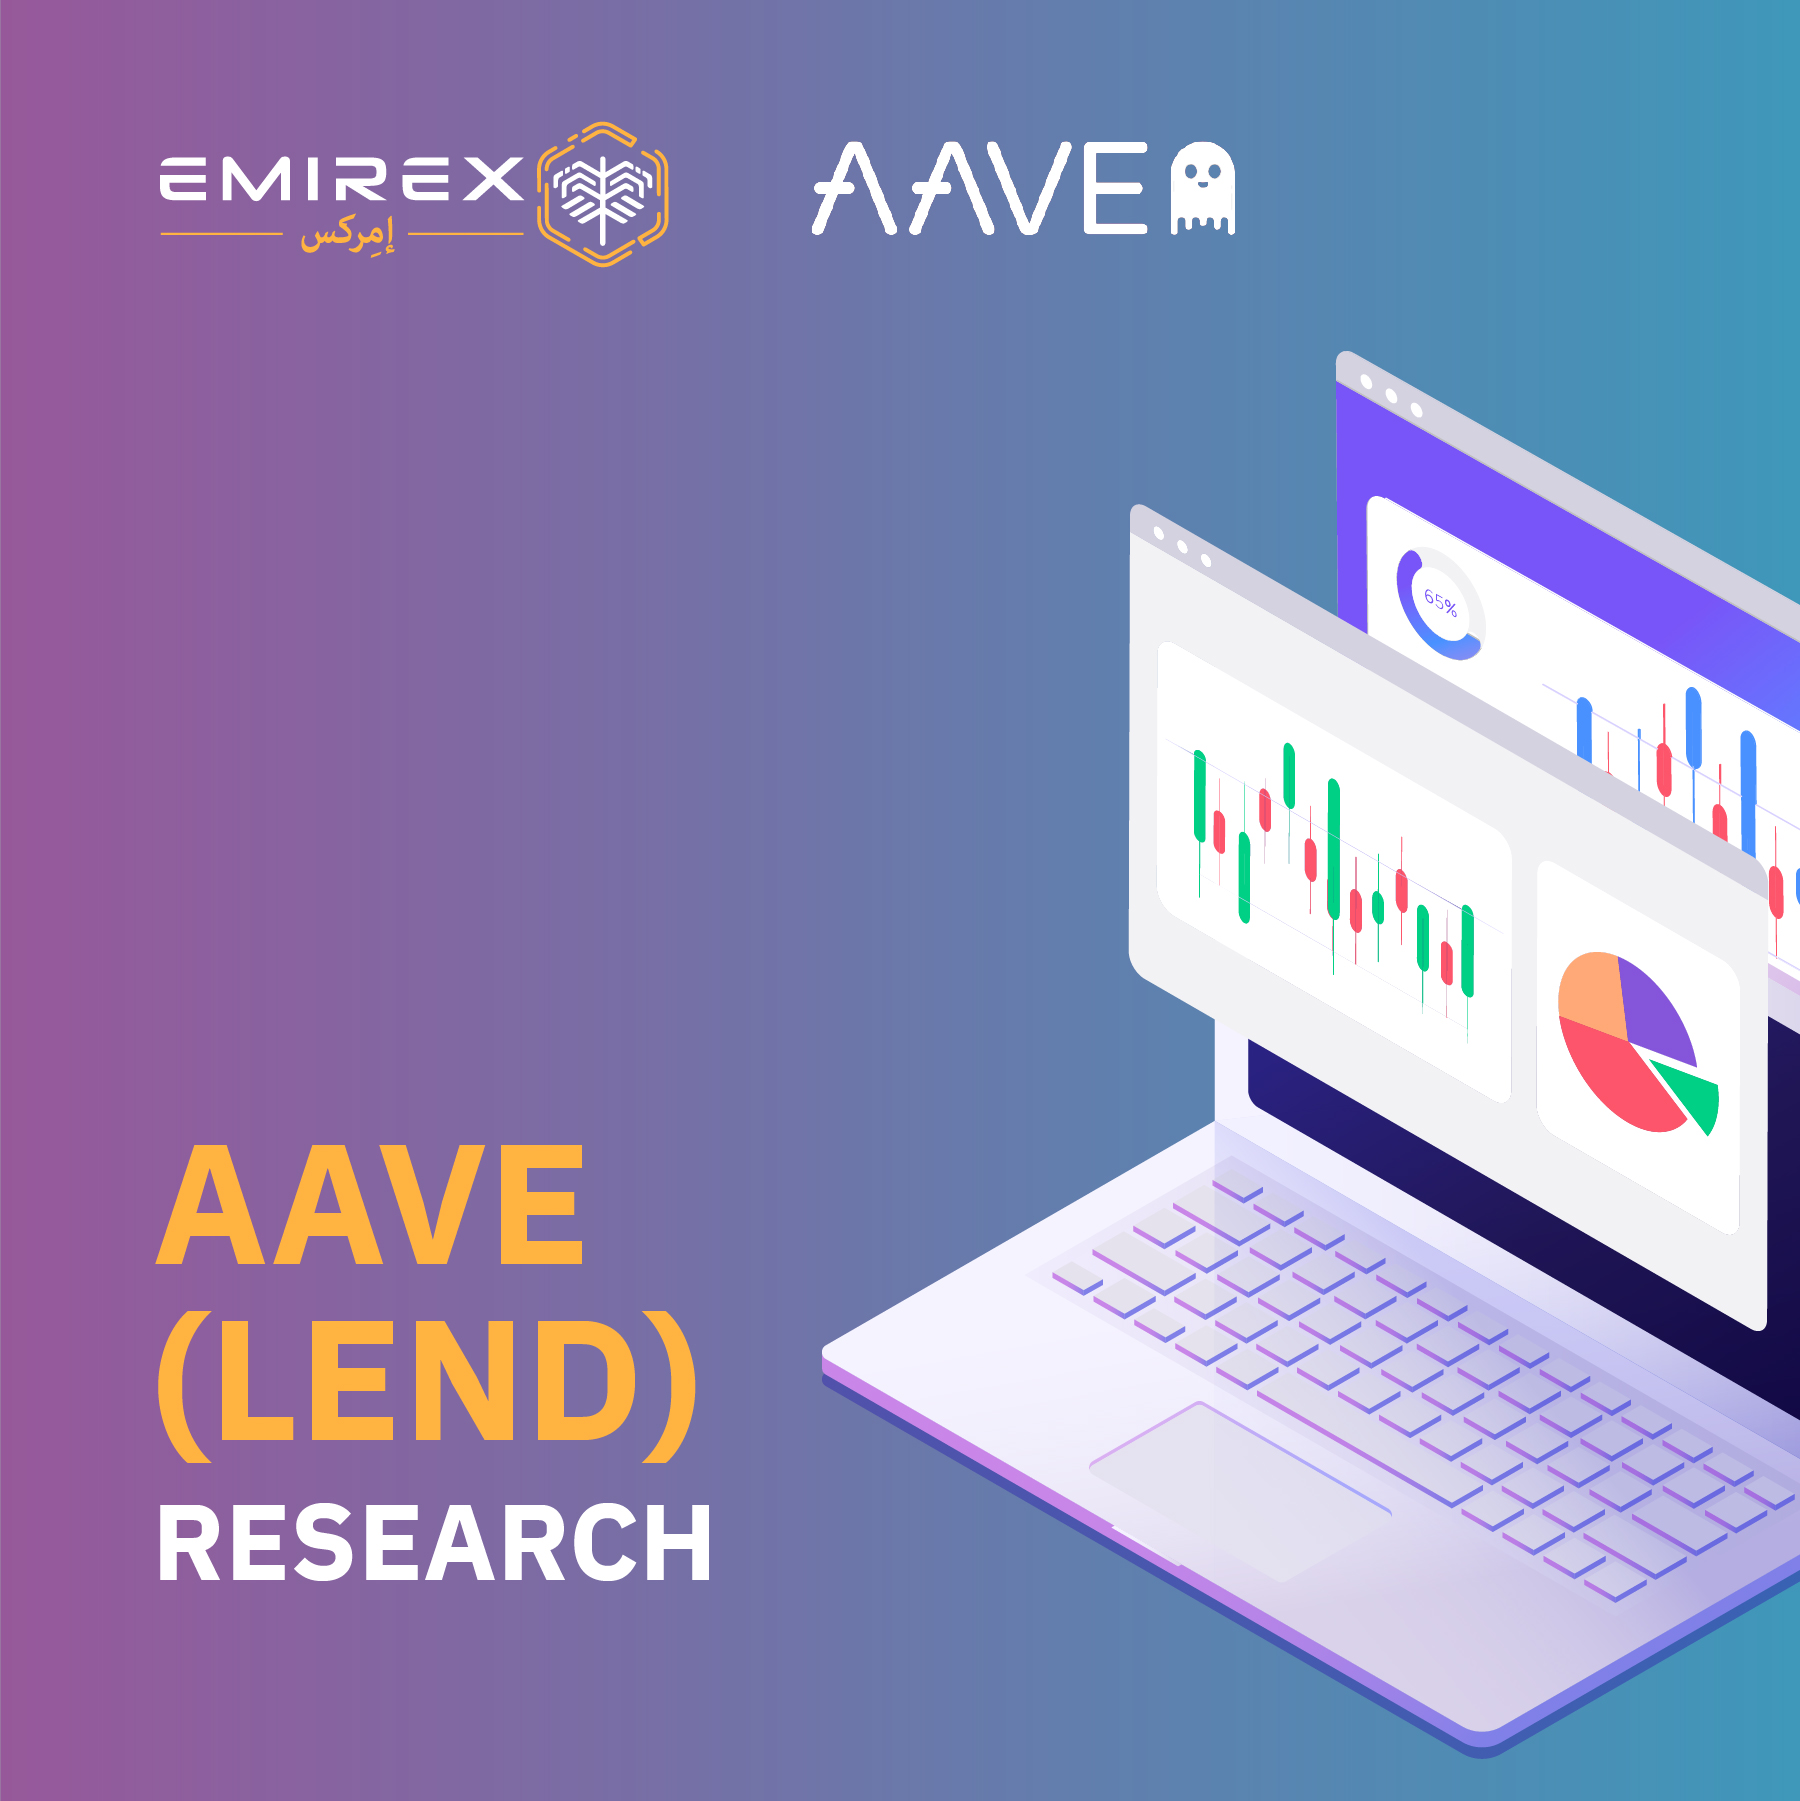 Deep Dive into Aave (LEND)